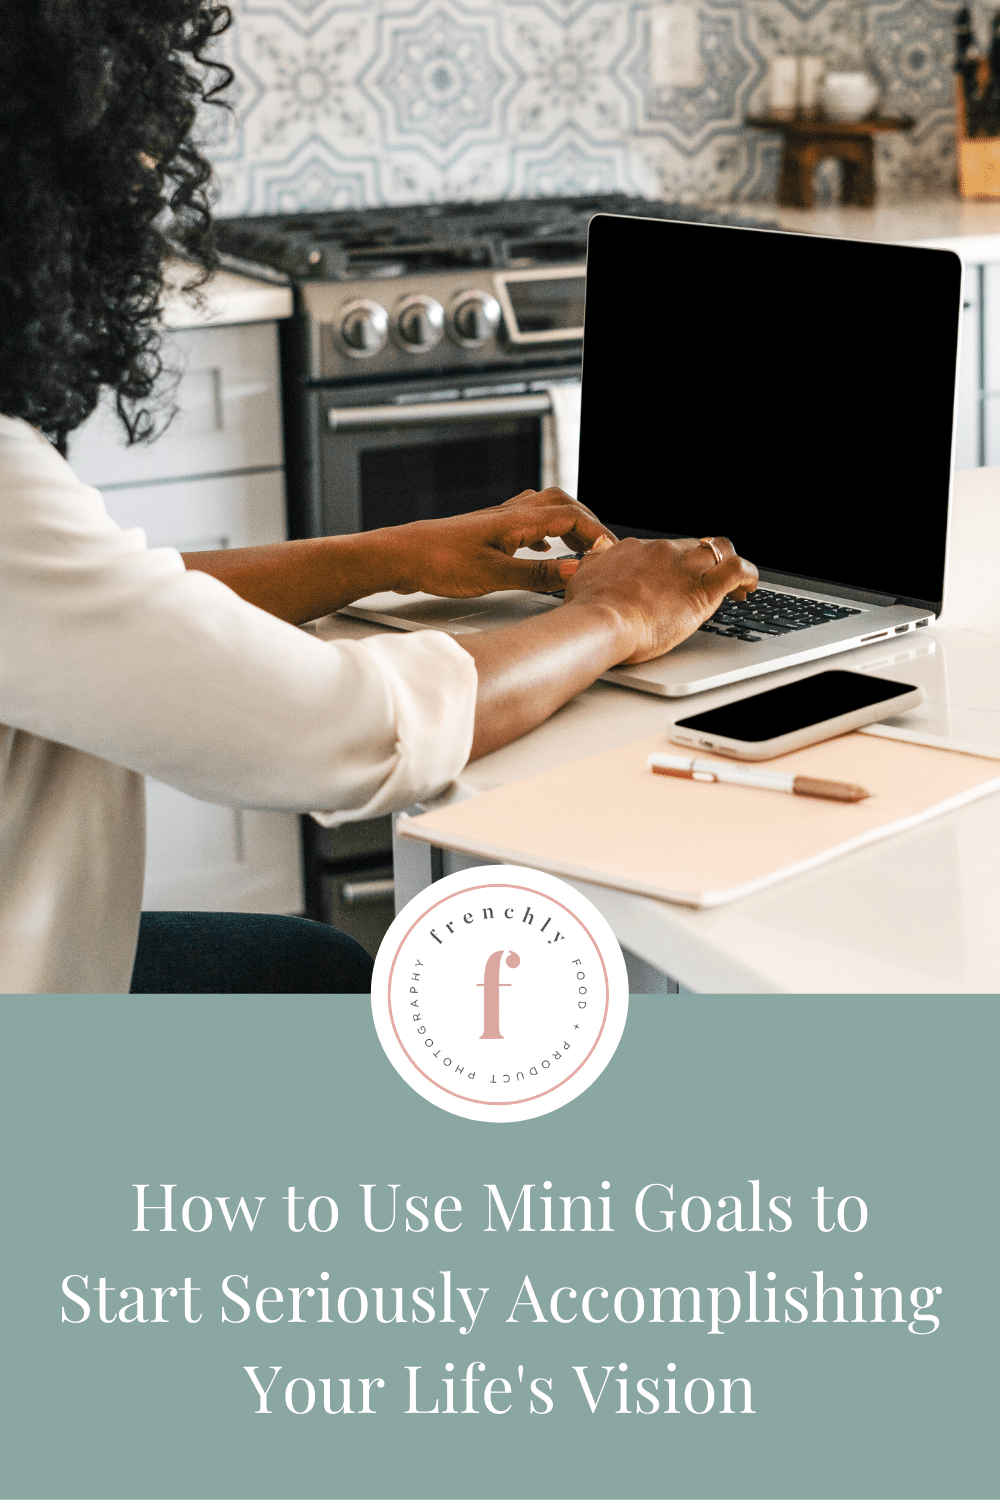 How To Use Mini Goals To Start Seriously Accomplishing Your Life's Vision | Frenchly Food + Product Photography